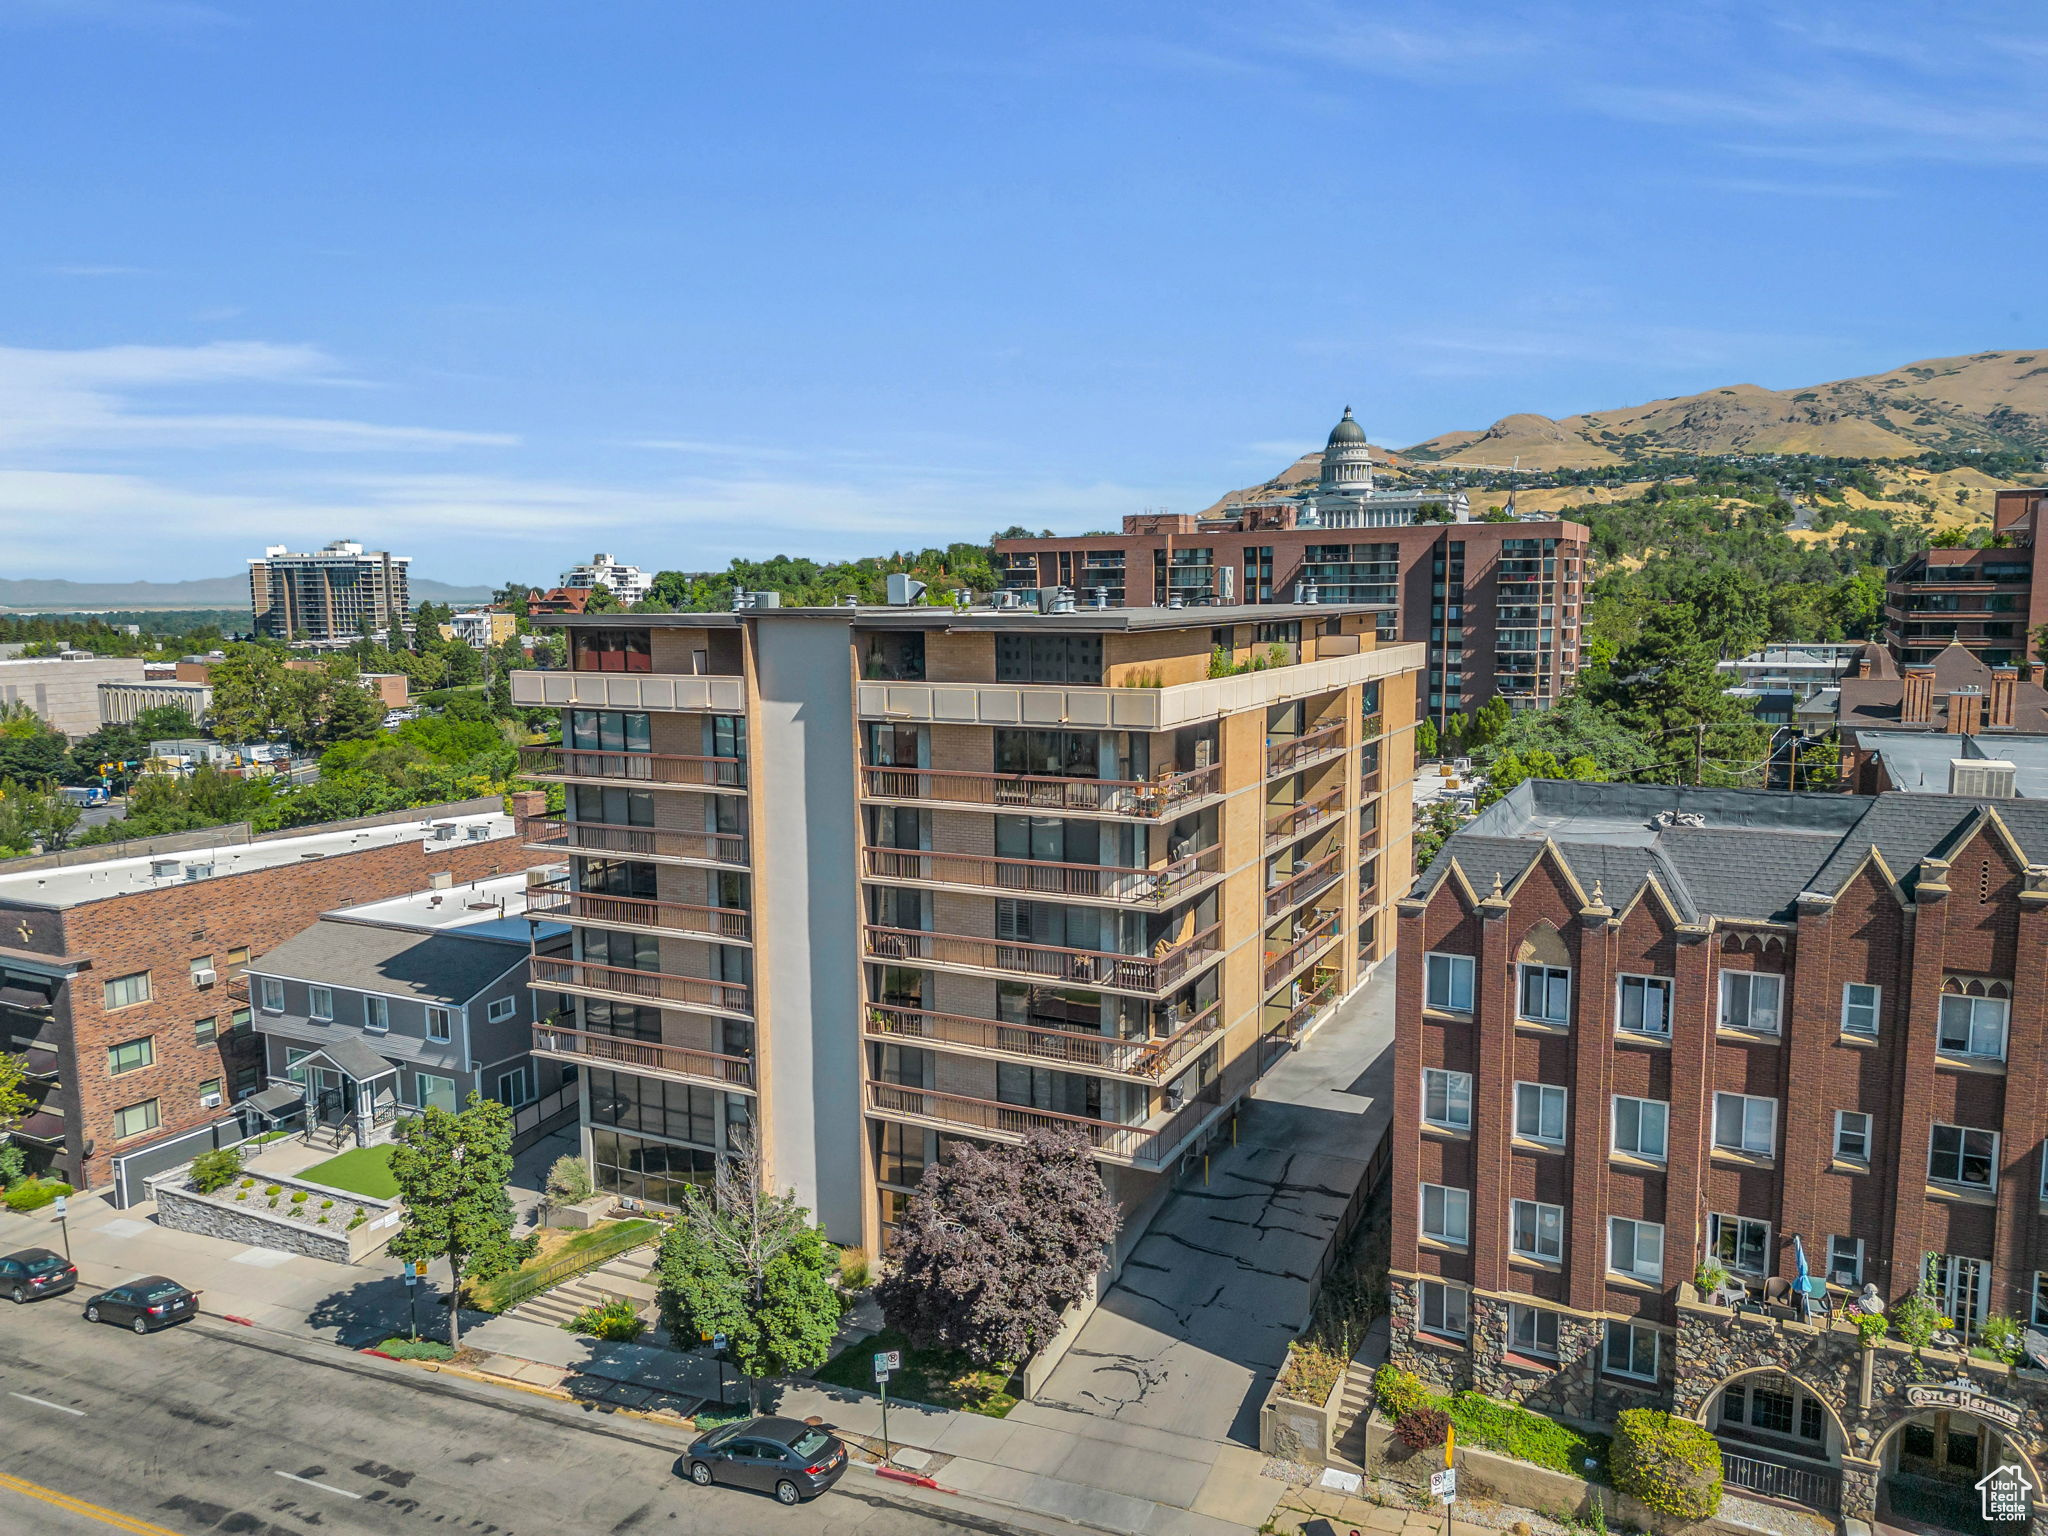 View of City Crest Condominiums exterior featuring the state capitol in the background